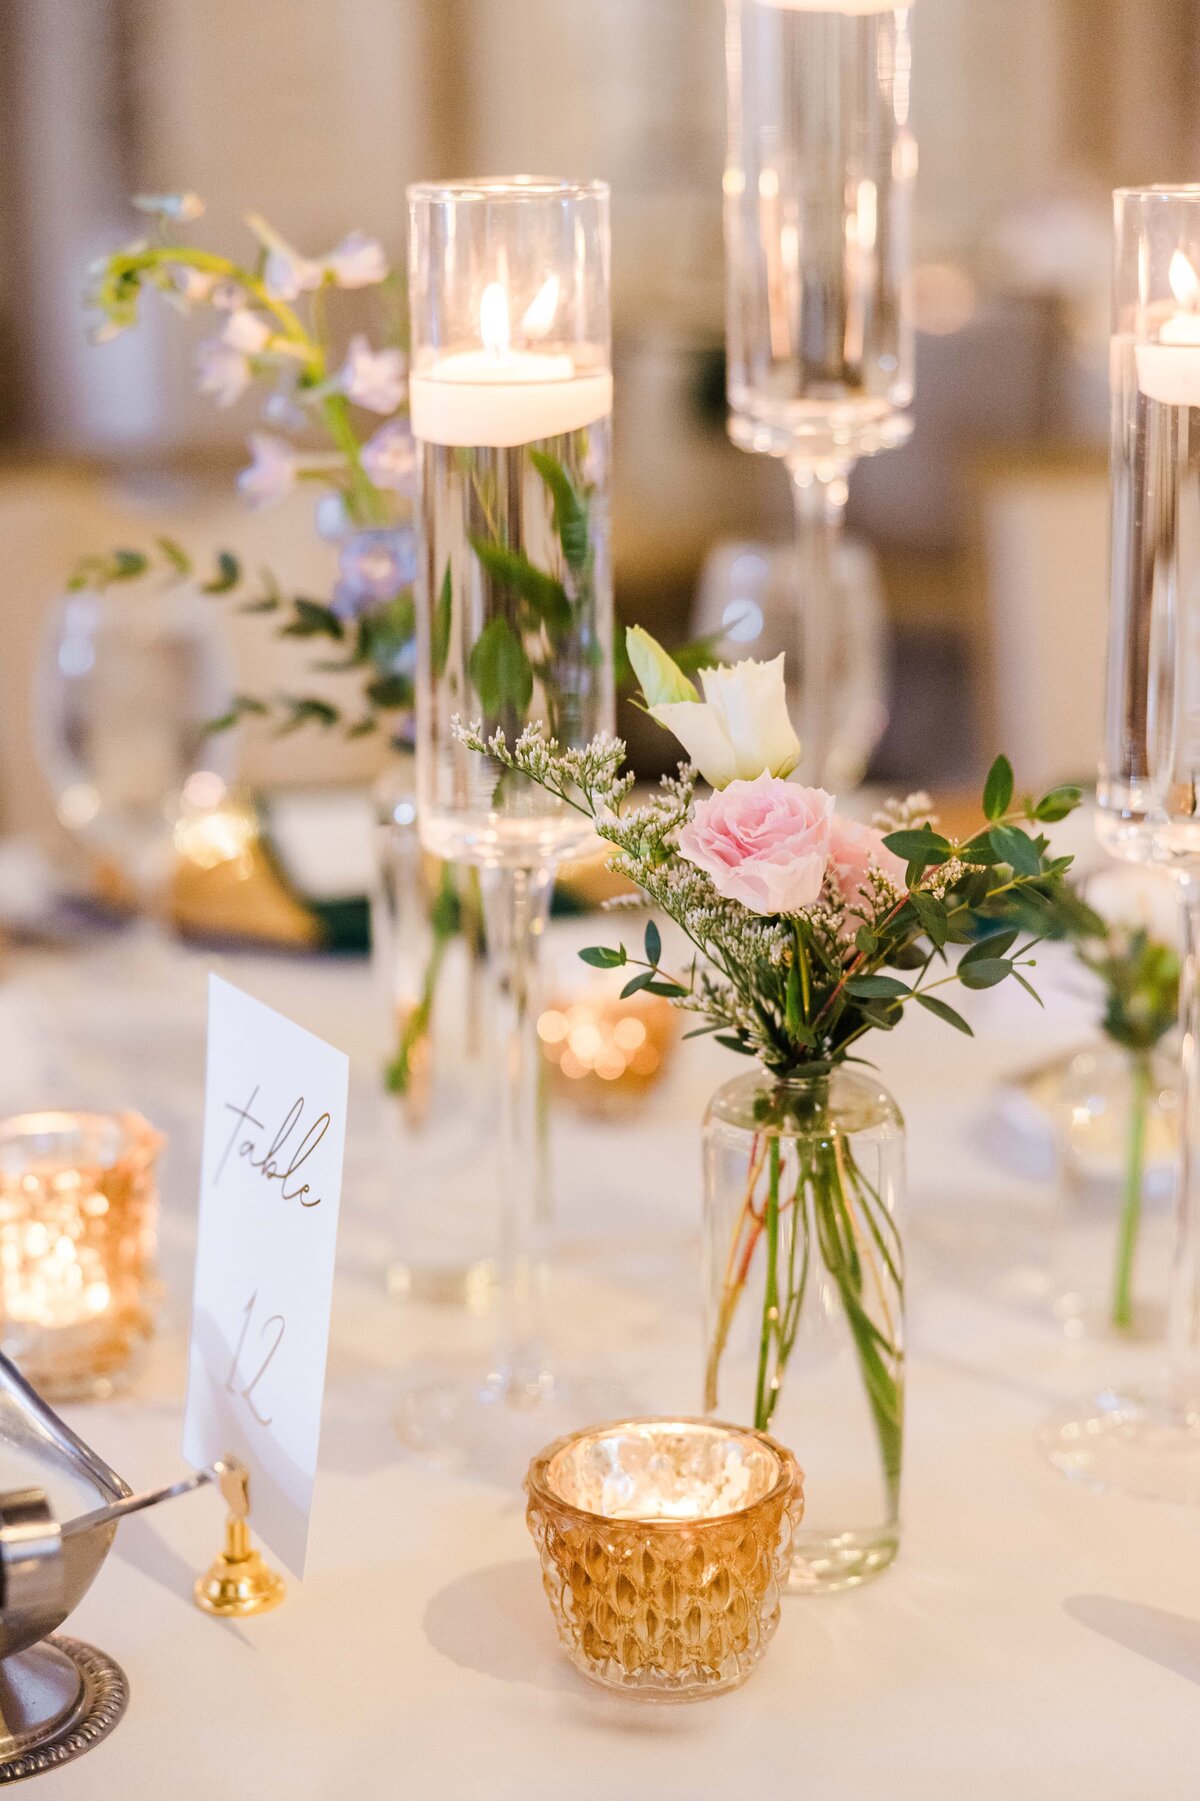 Elegant wedding table setting featuring candles in tall glass holders, a small bouquet with pink roses, and a table number card, meticulously arranged by a renowned wedding planner from Des Moines.